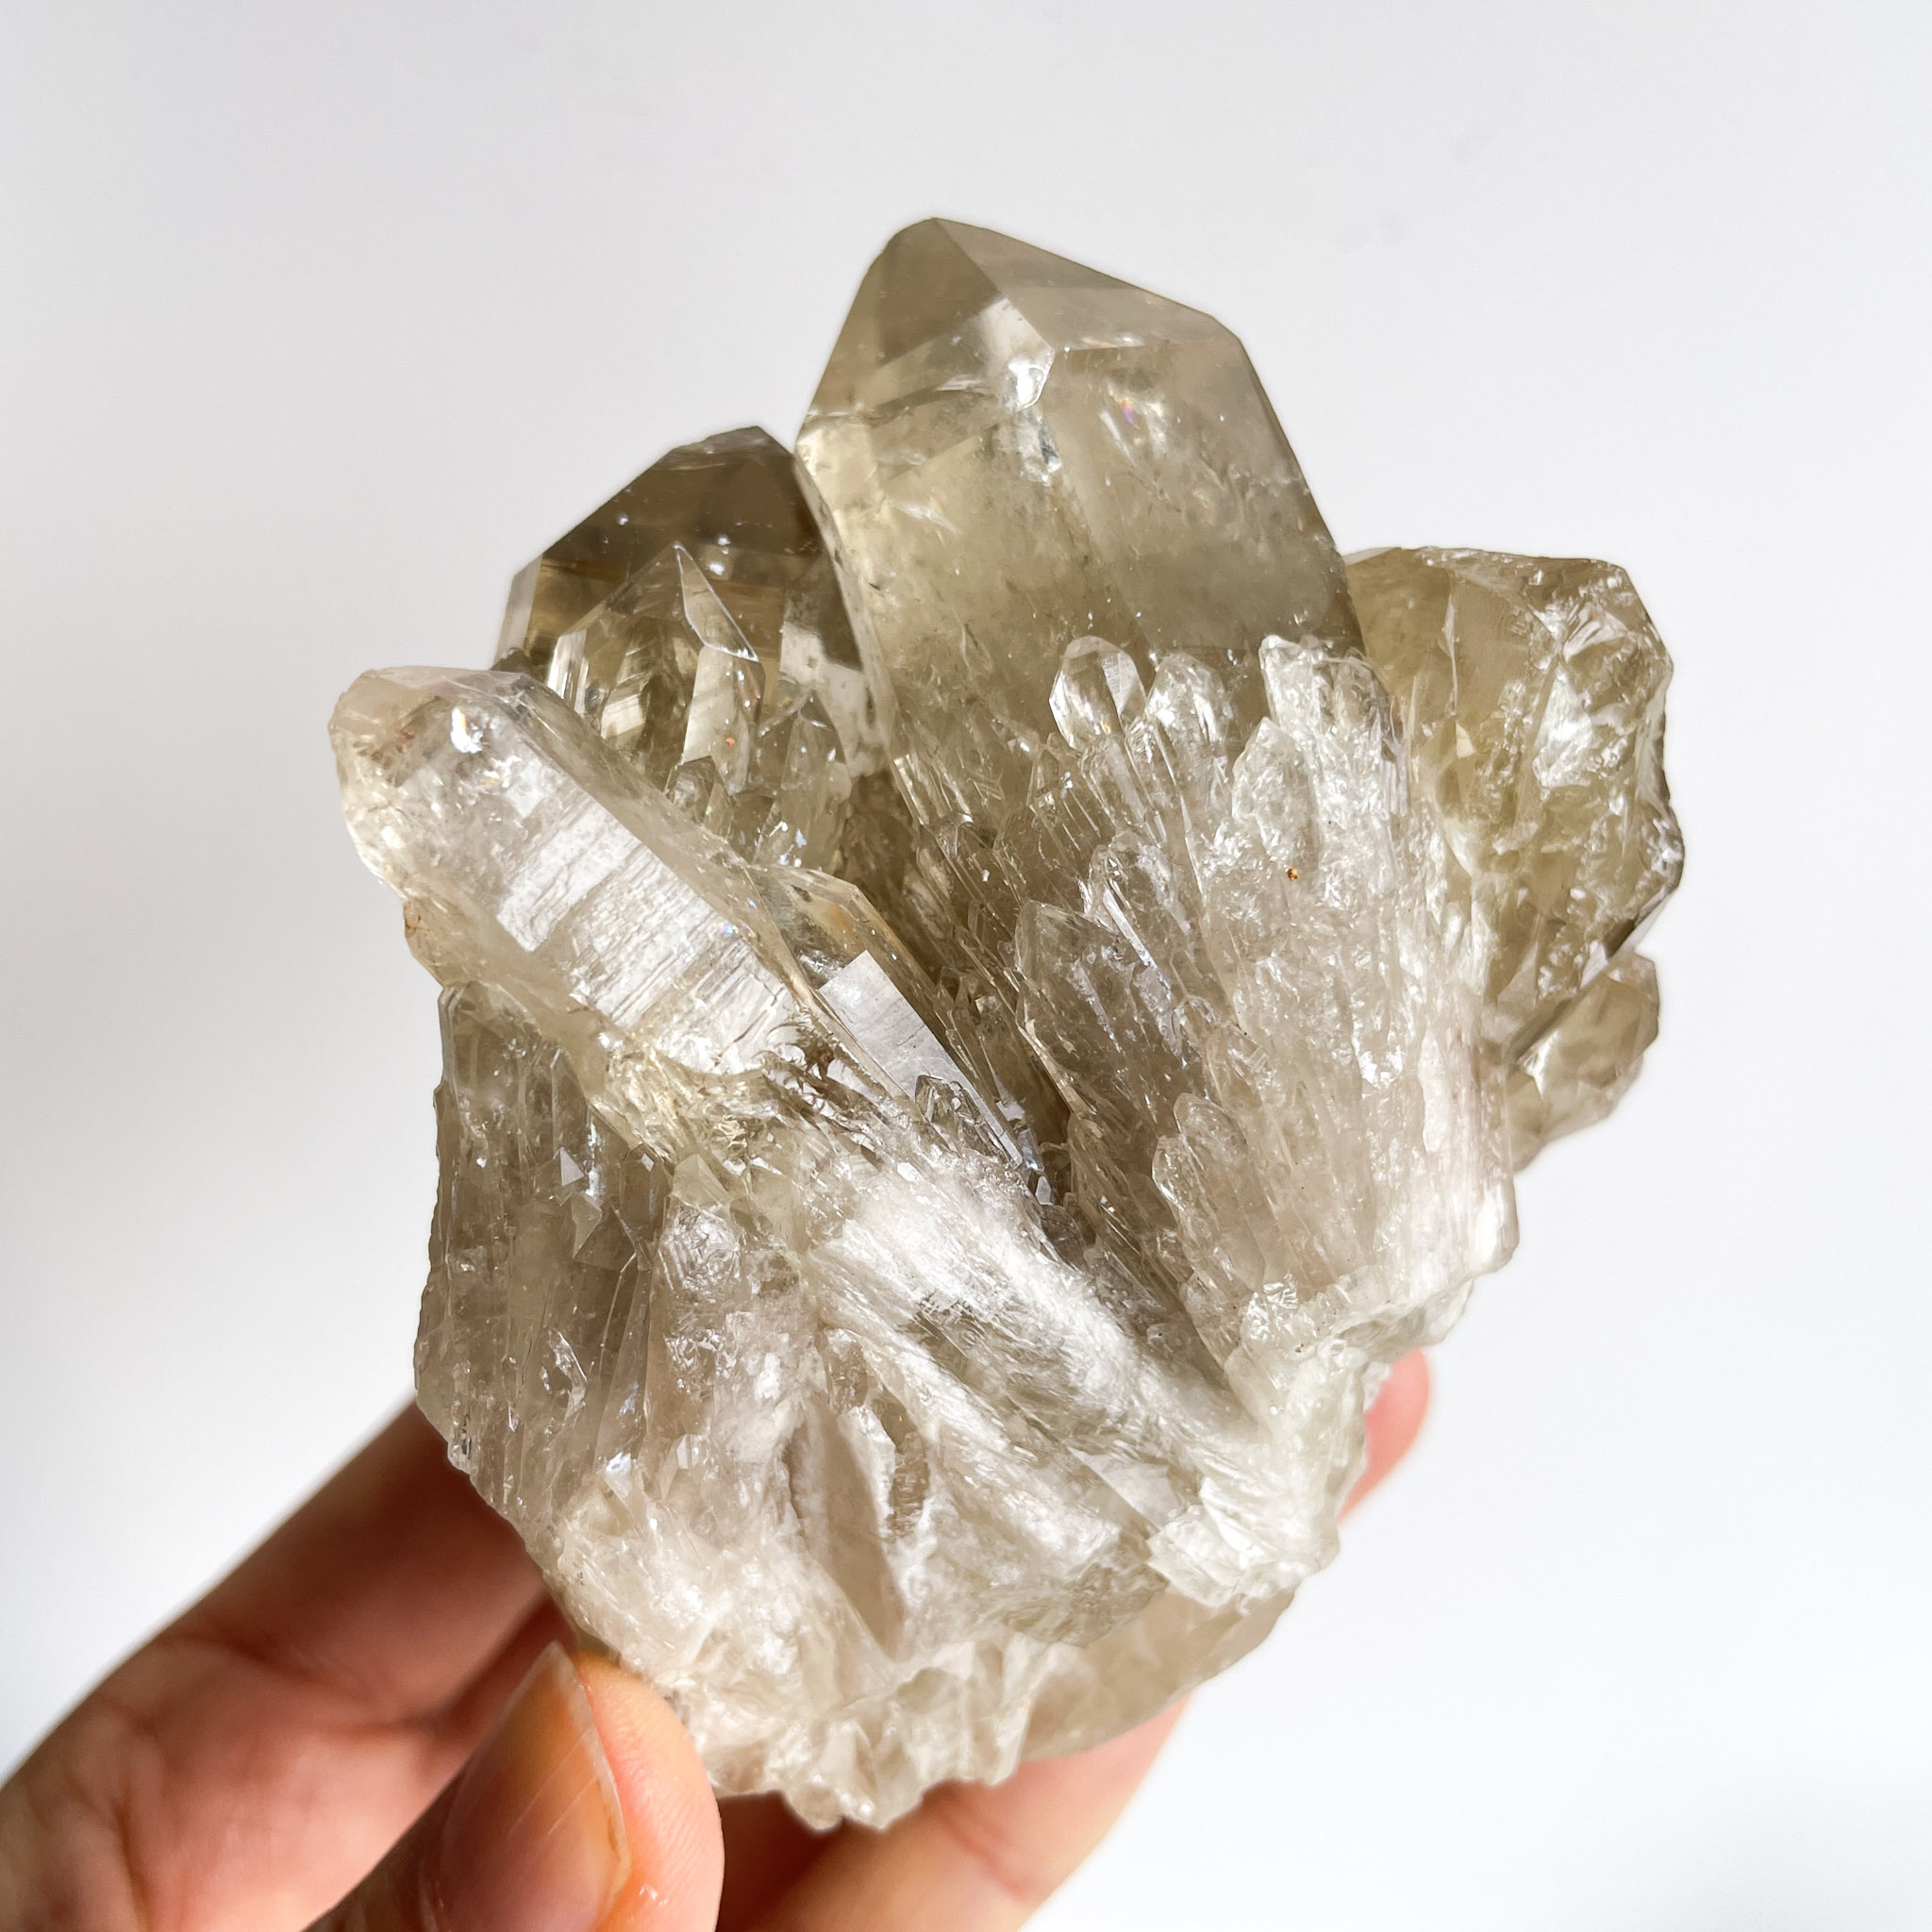 A hand holding a cluster of transparent quartz crystals against a white background.